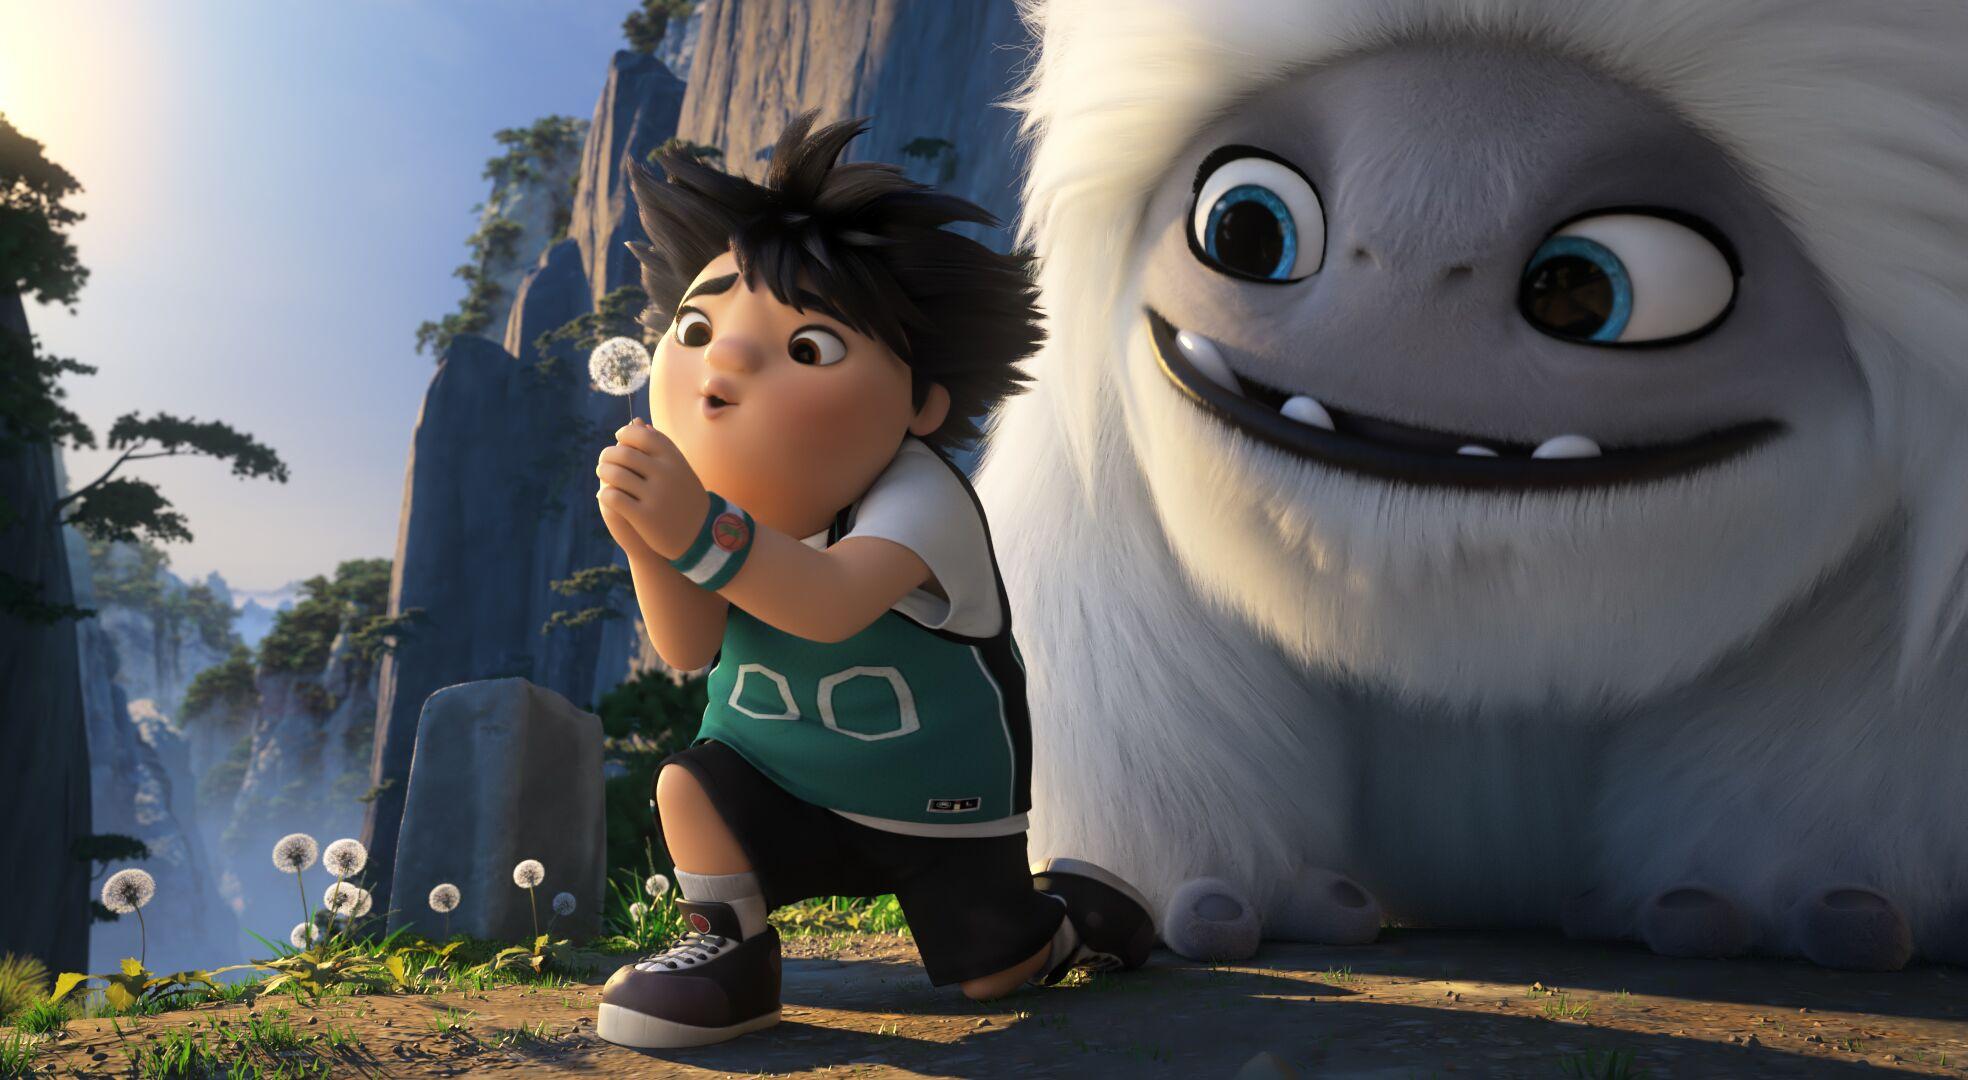 Abominable: 20 Things to Know About the Dreamworks Animated